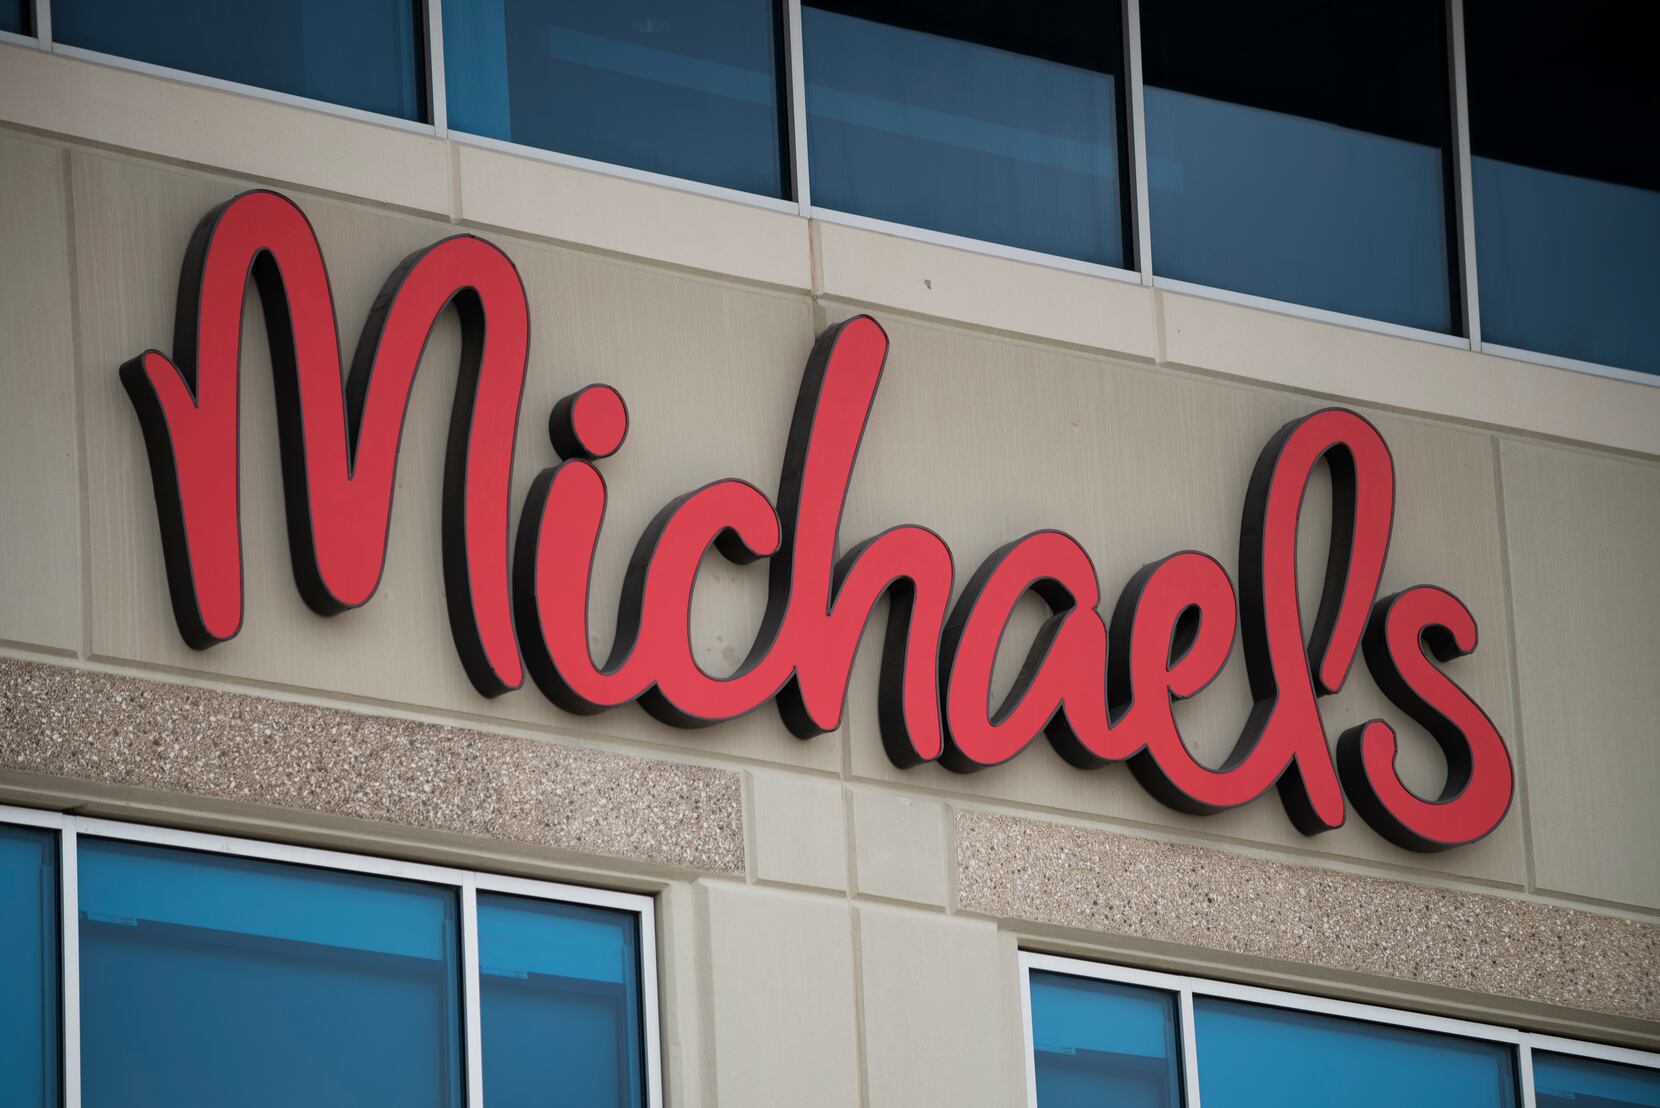 Arts and crafts retailer Michaels worries about impact of bigger